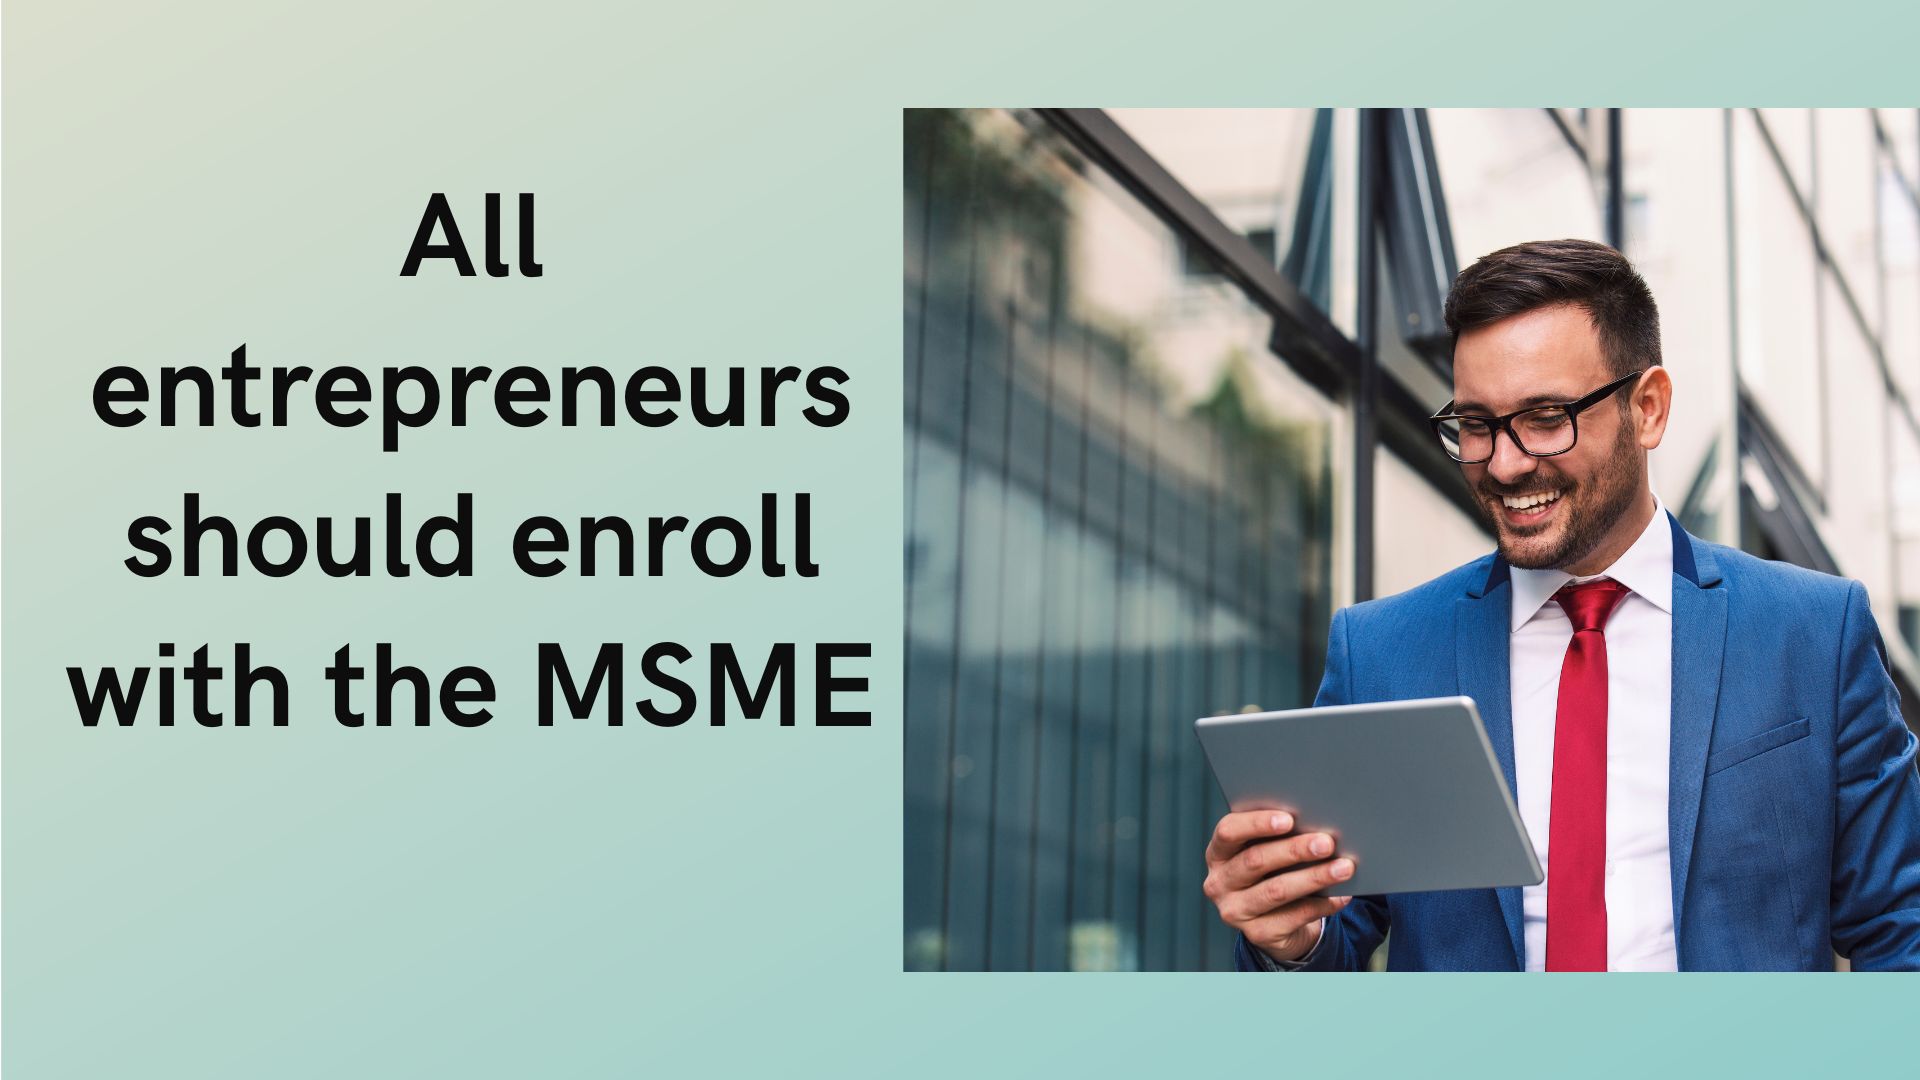 All entrepreneurs should enroll with the MSME